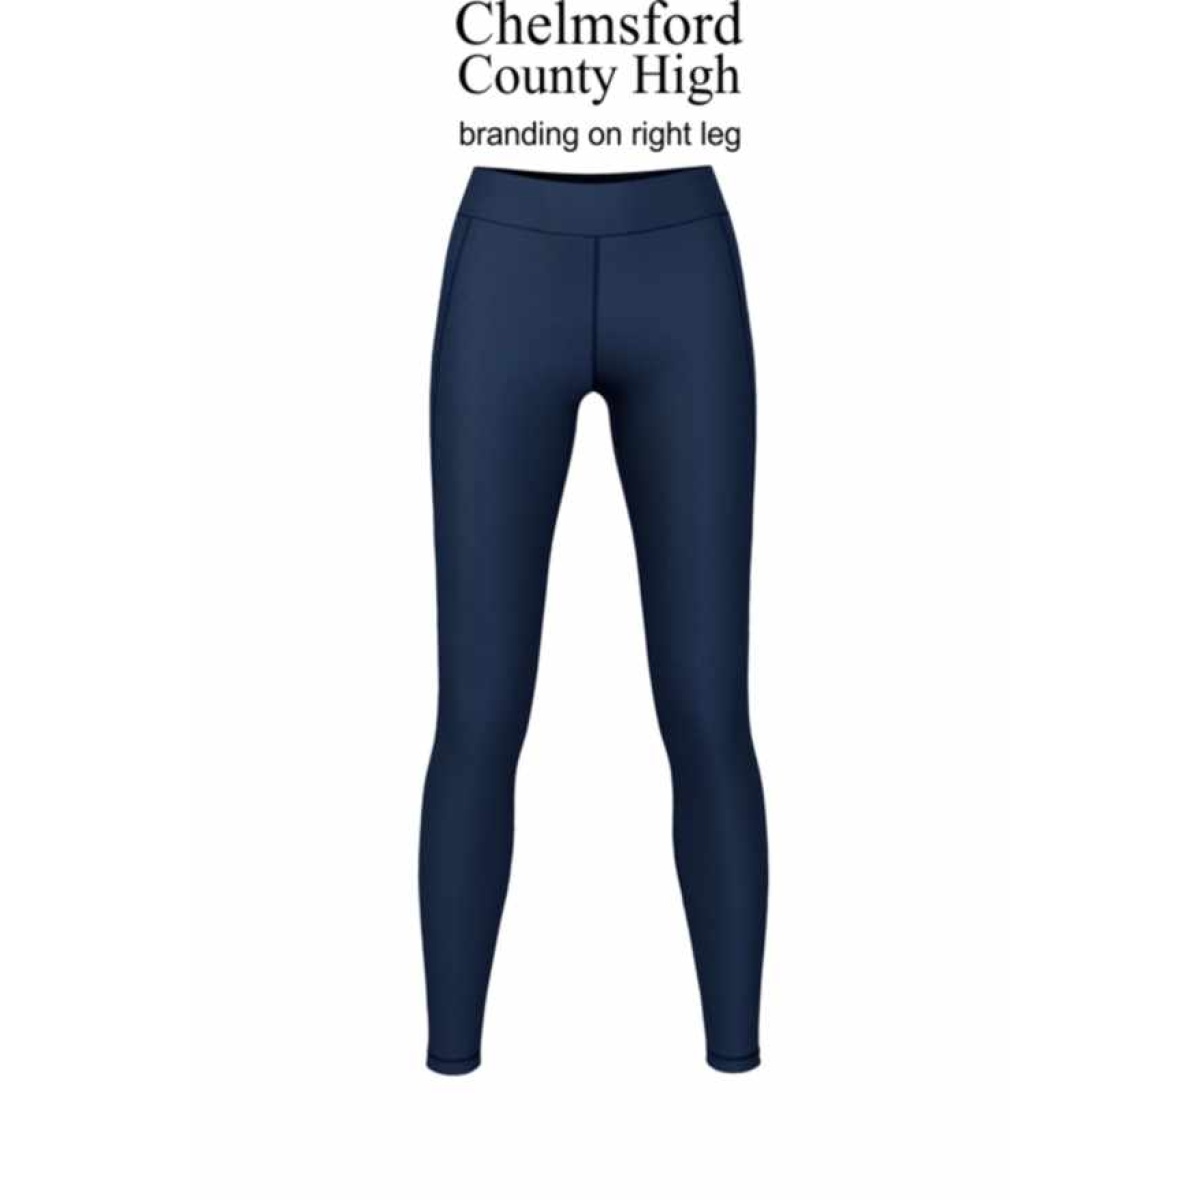 Chelmsford County High for Girls - NEW style base legging, Chelmsford County High School for Girls